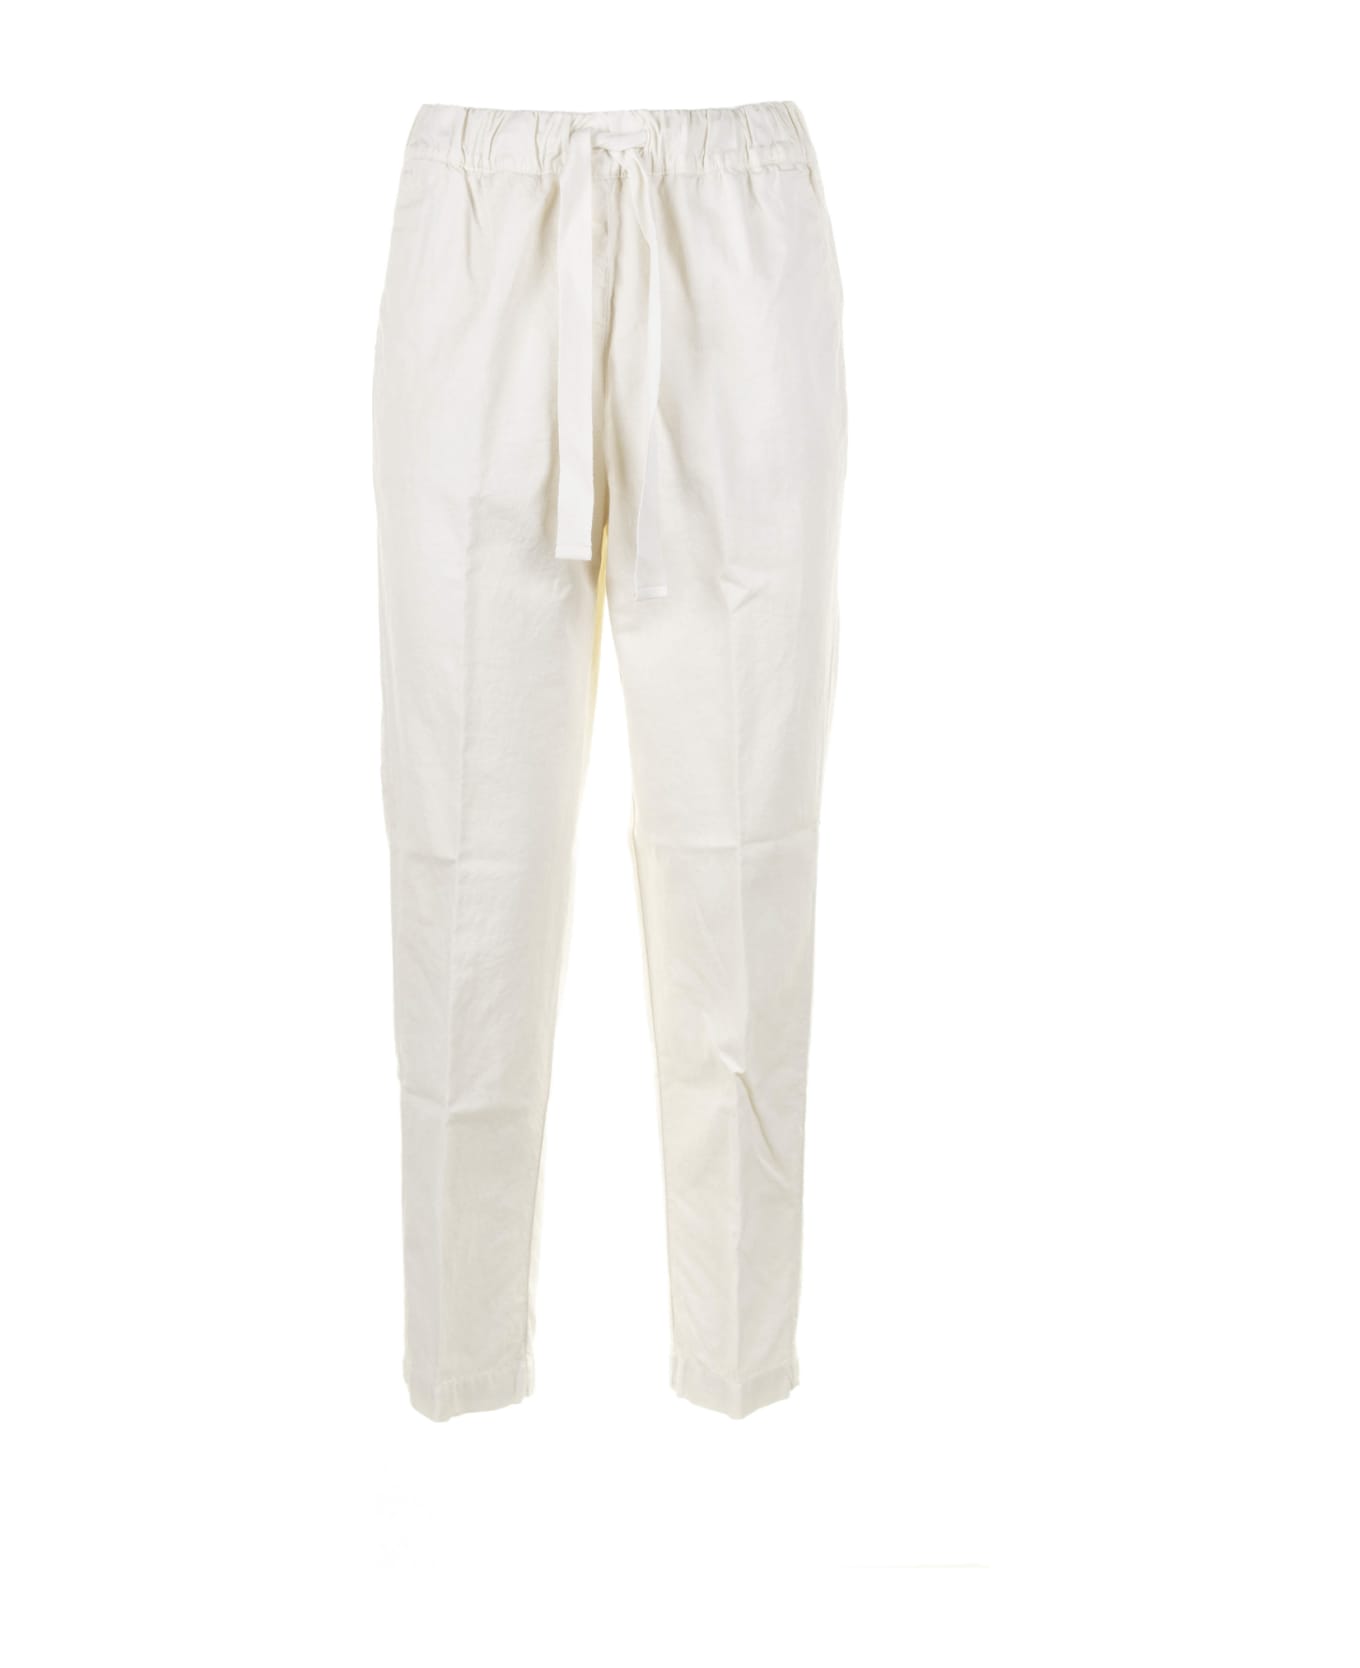 Myths White High-waisted Trousers With Drawstring - OFF WHITE